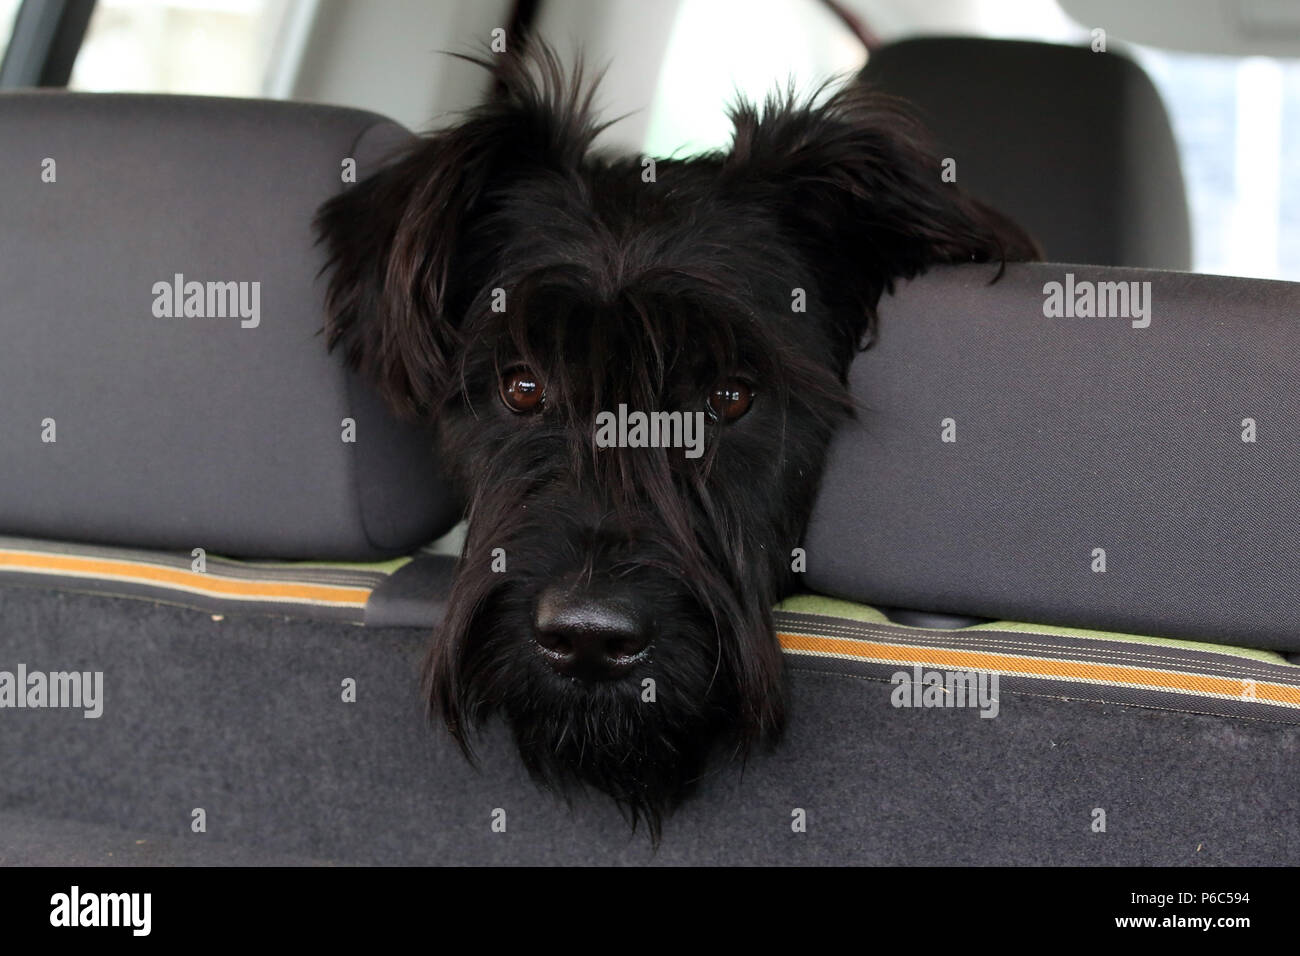 Werneuchen, Giant Schnauzer looks out in the car between two headrests Stock Photo